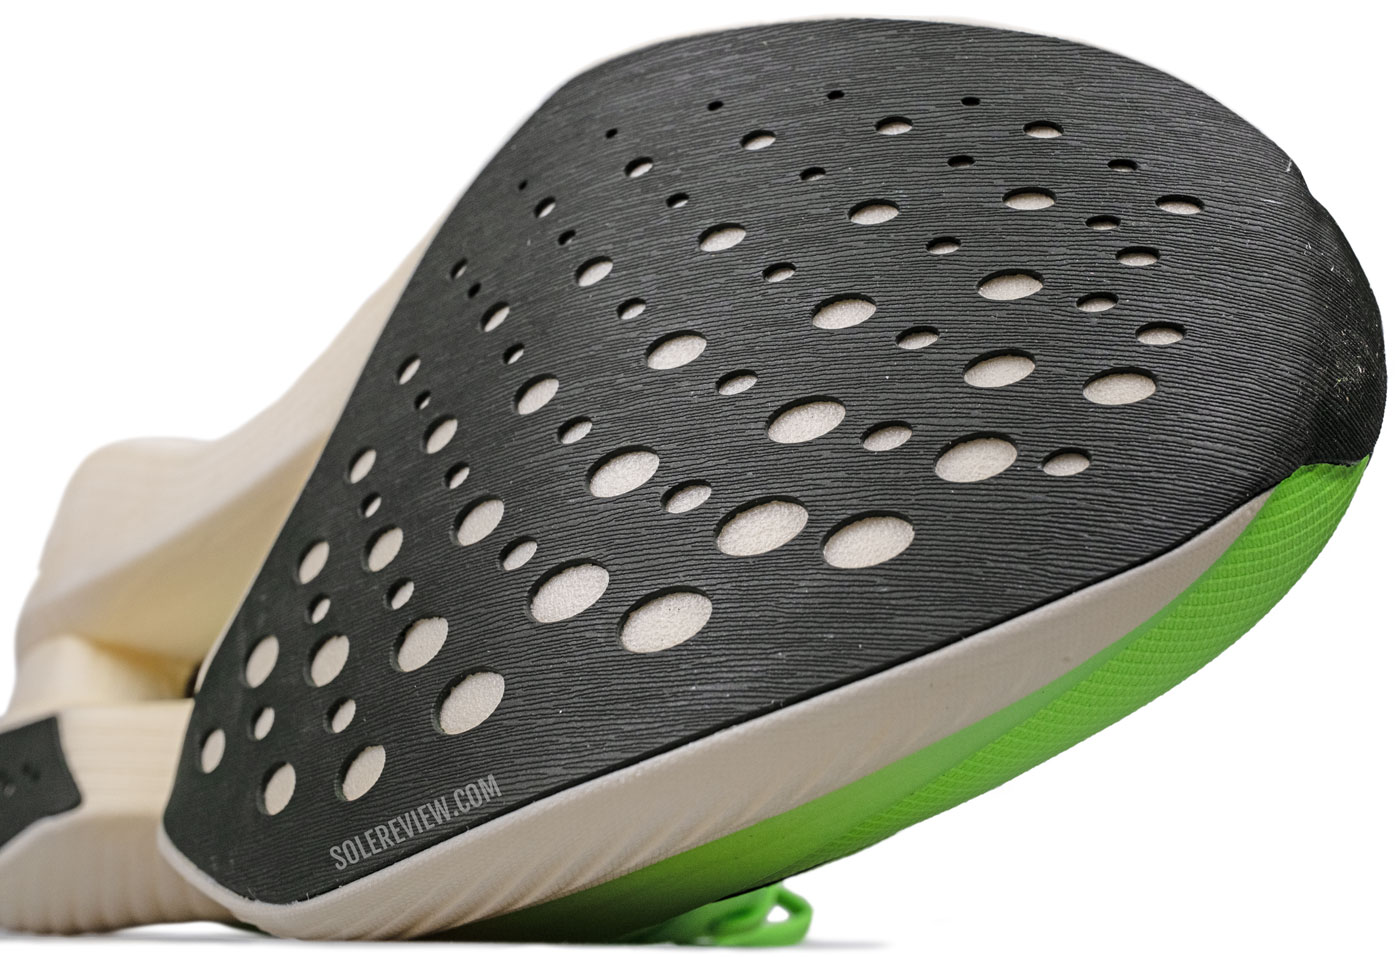 The forefoot outsole of the Saucony Endorphin Elite.